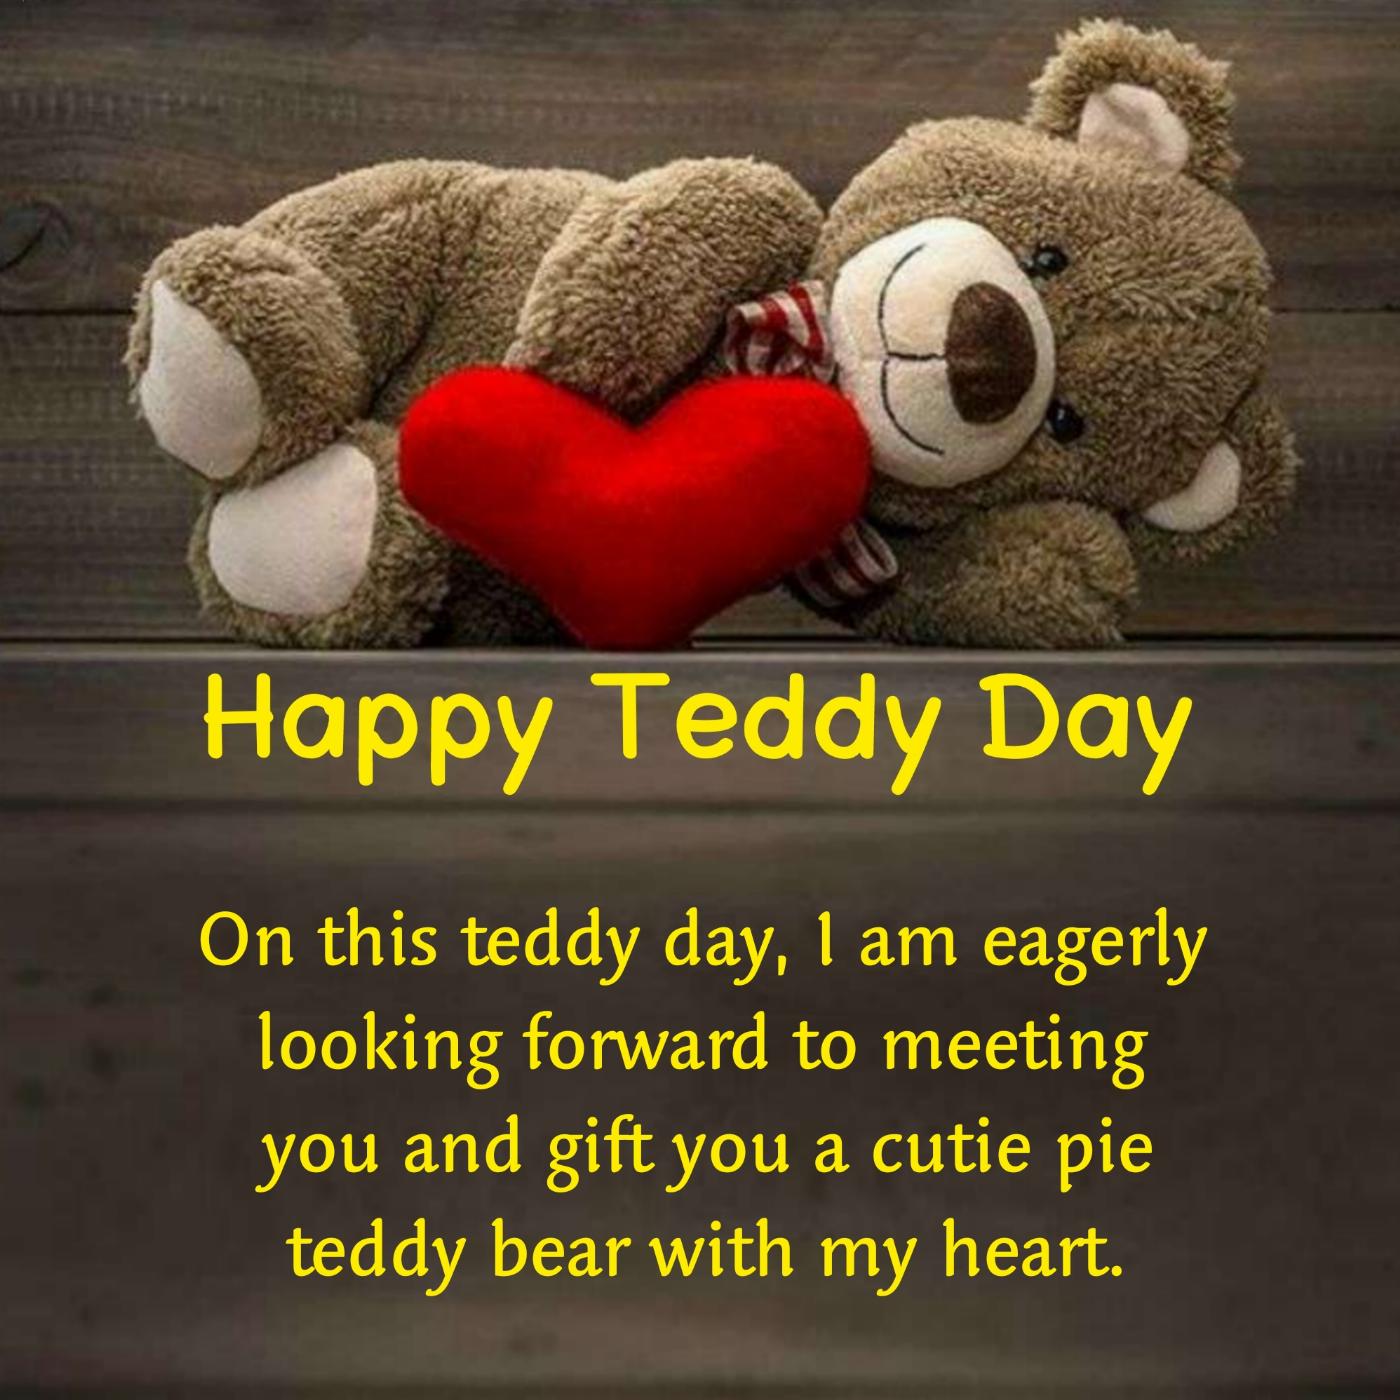 On this teddy day I am eagerly looking forward to meeting you